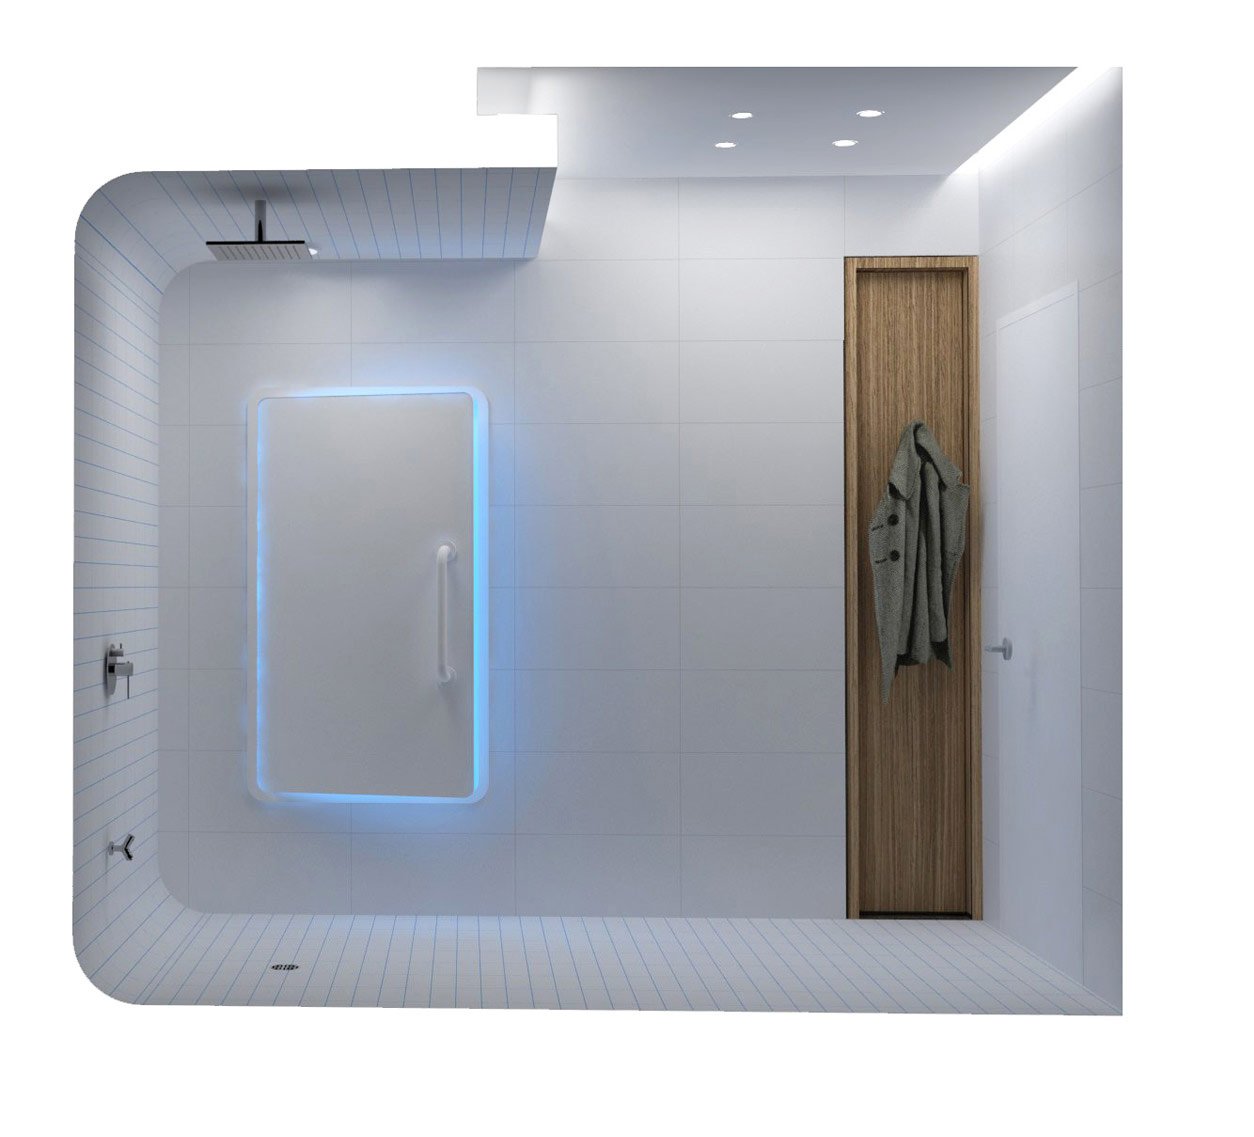 NYC Architect Architecture Modern Wellness Design Float Spa Commercial Renovate Renovation Flotation Therapy Section Rendering Subway Tile